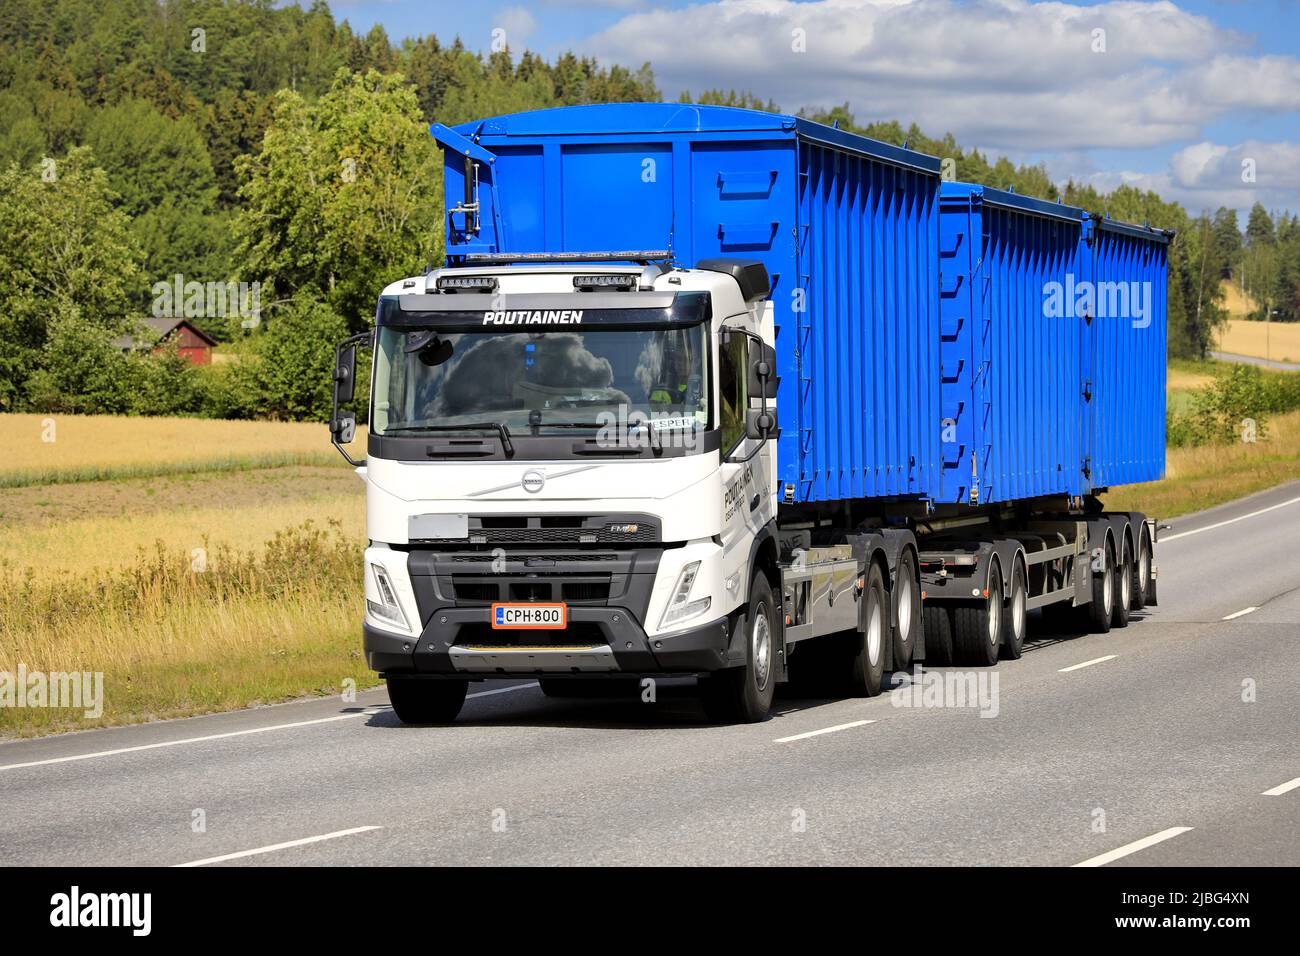 White Volvo FMX truck Martti Poutiainen Oy transports containers for environmental services along highway 52. Salo, Finland. August 11, 2021. Stock Photo